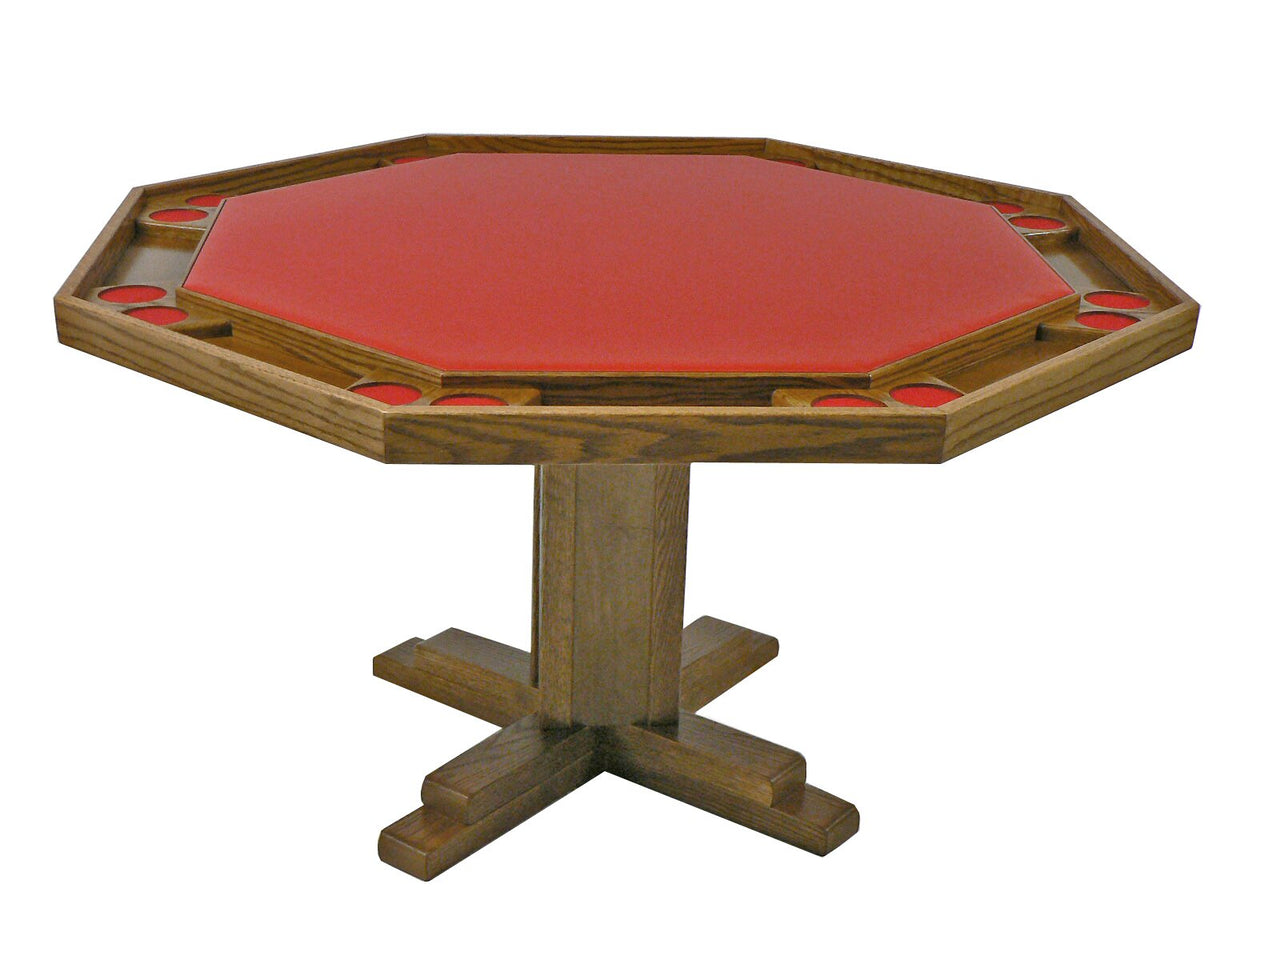 Octagonal Poker Table with Chairs, 8-person, Oak, Pedestal Base, by Kestell